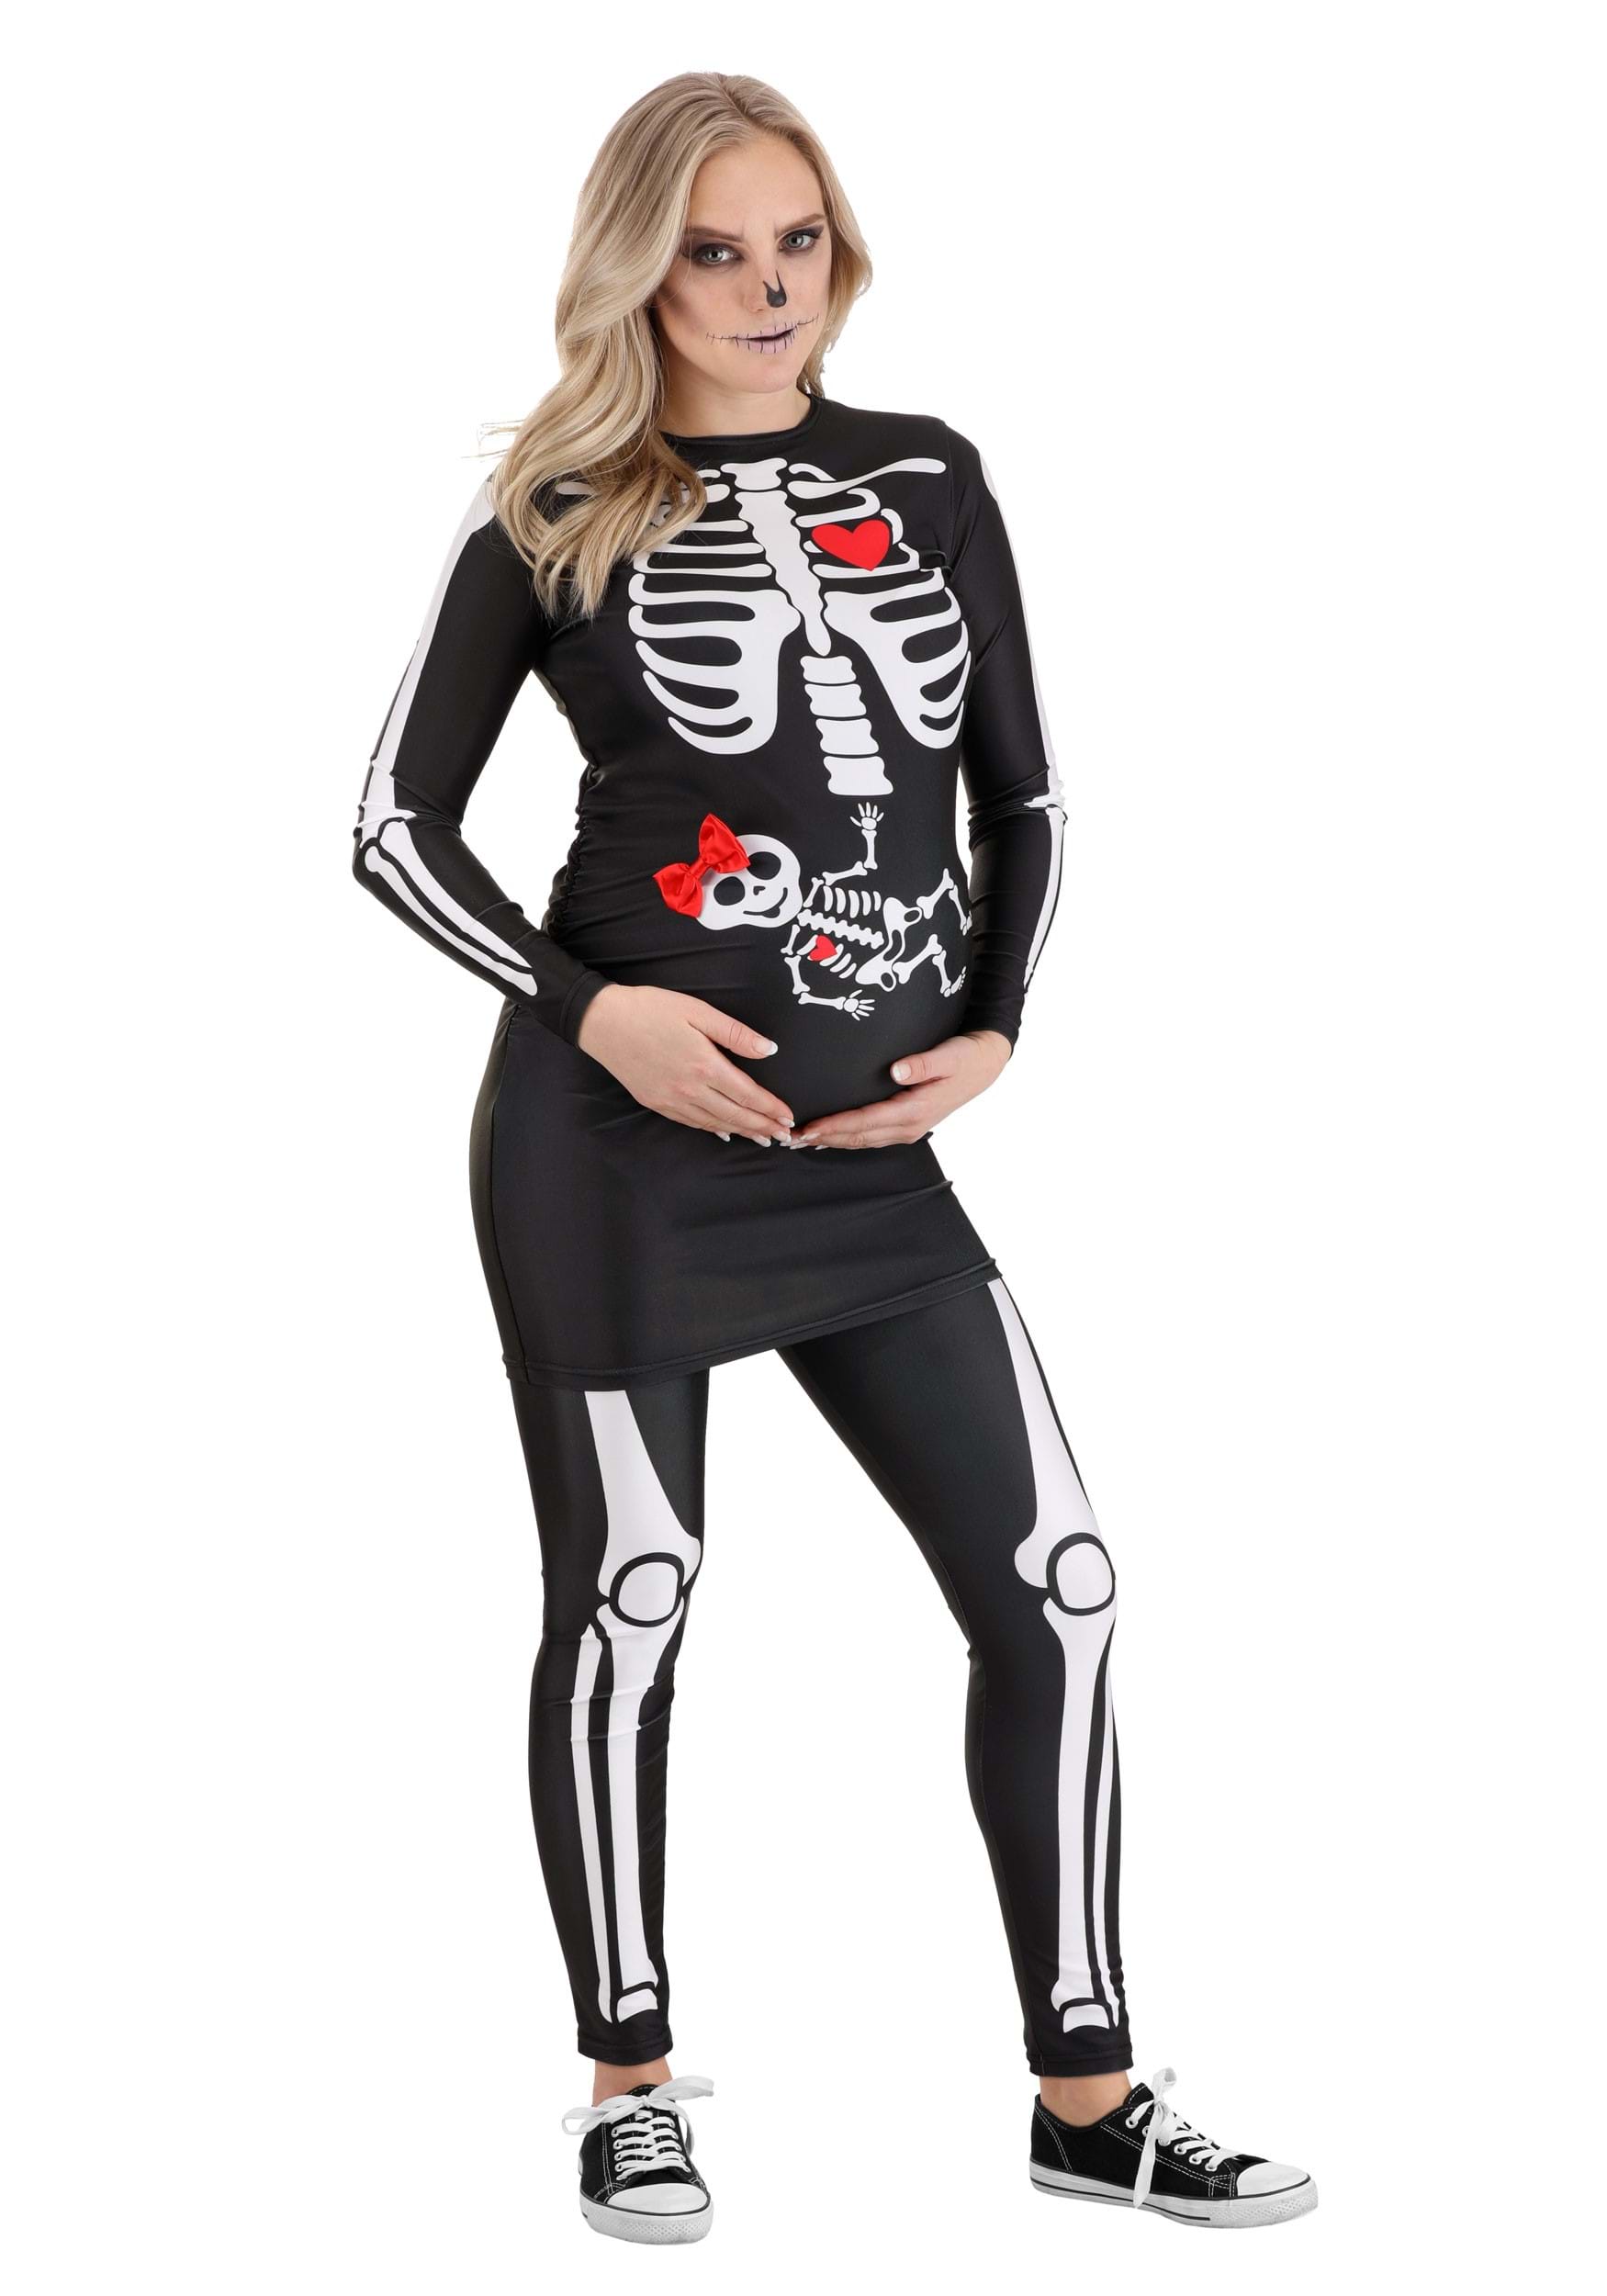 Women's Pregnant Skeleton Maternity Costume | Made by Us Costumes